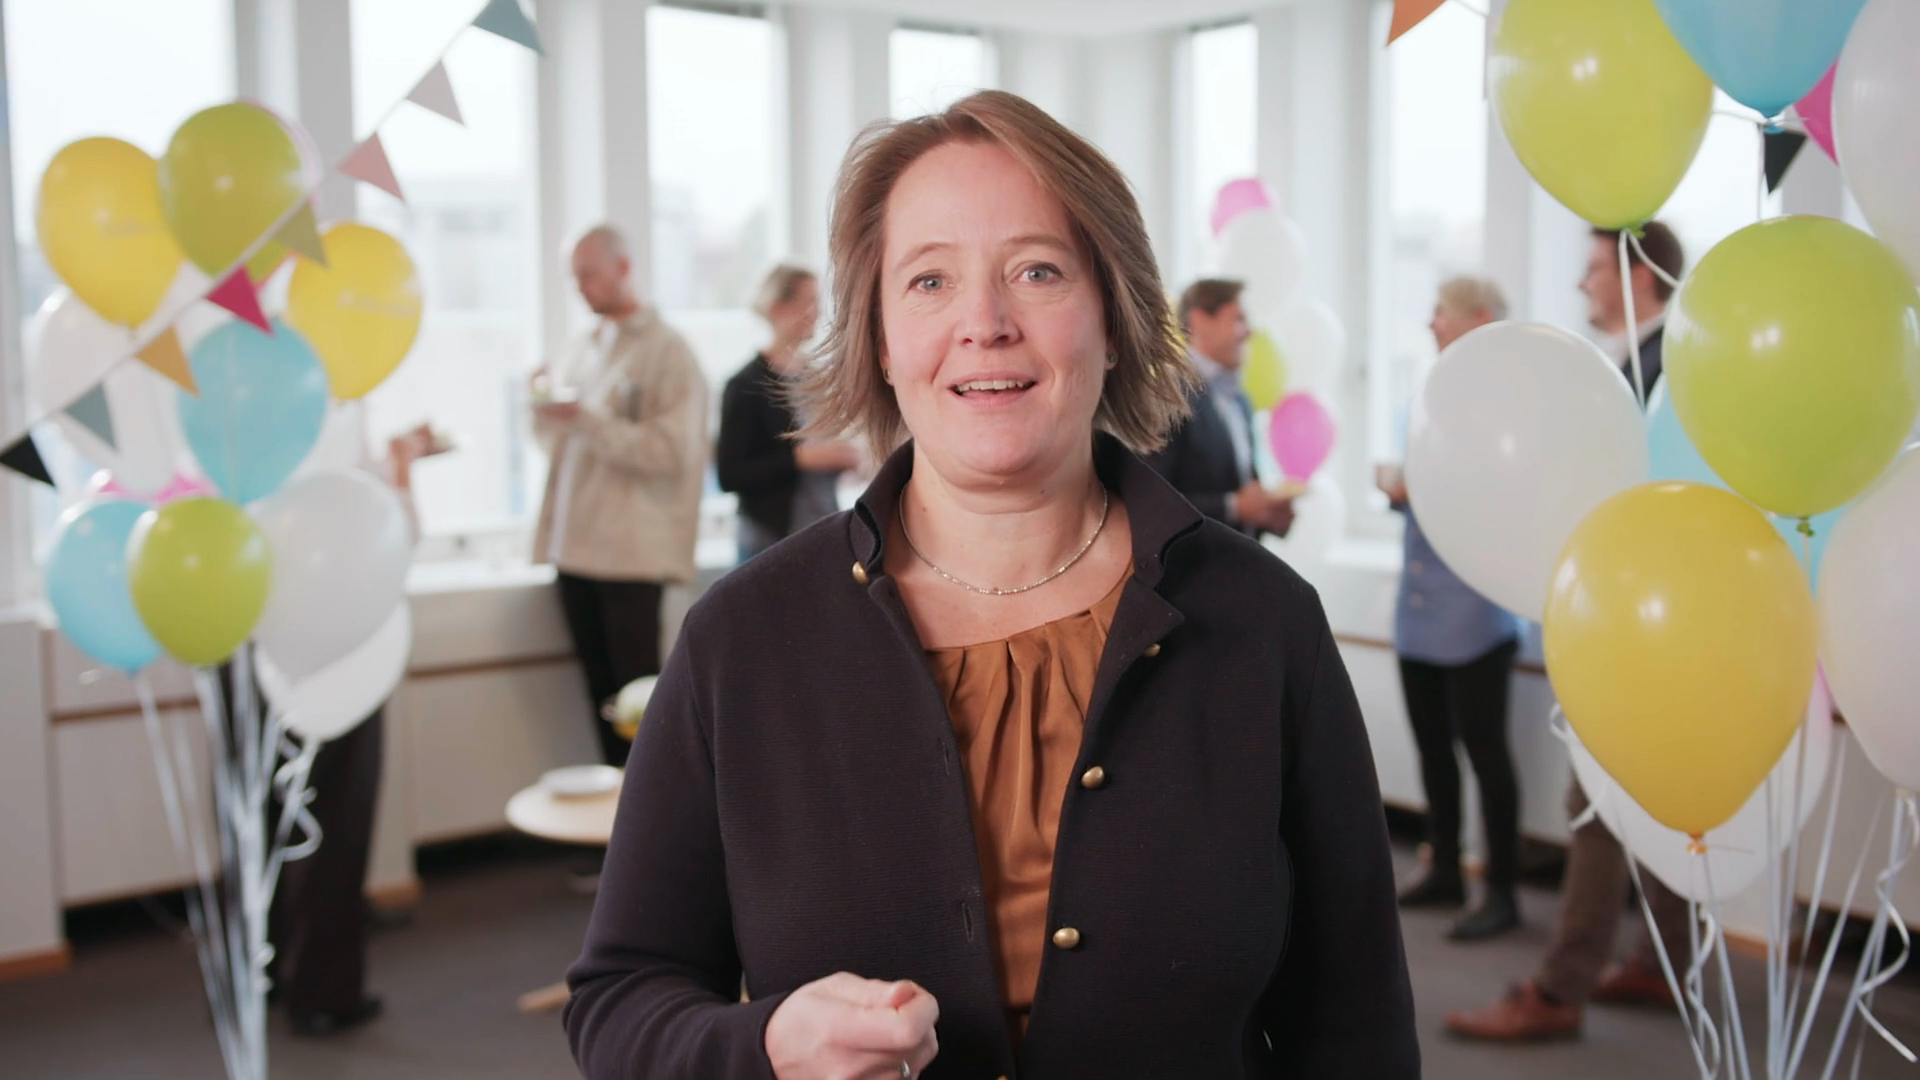 Ylva Wessén in a clip from Folksam's Welcome video